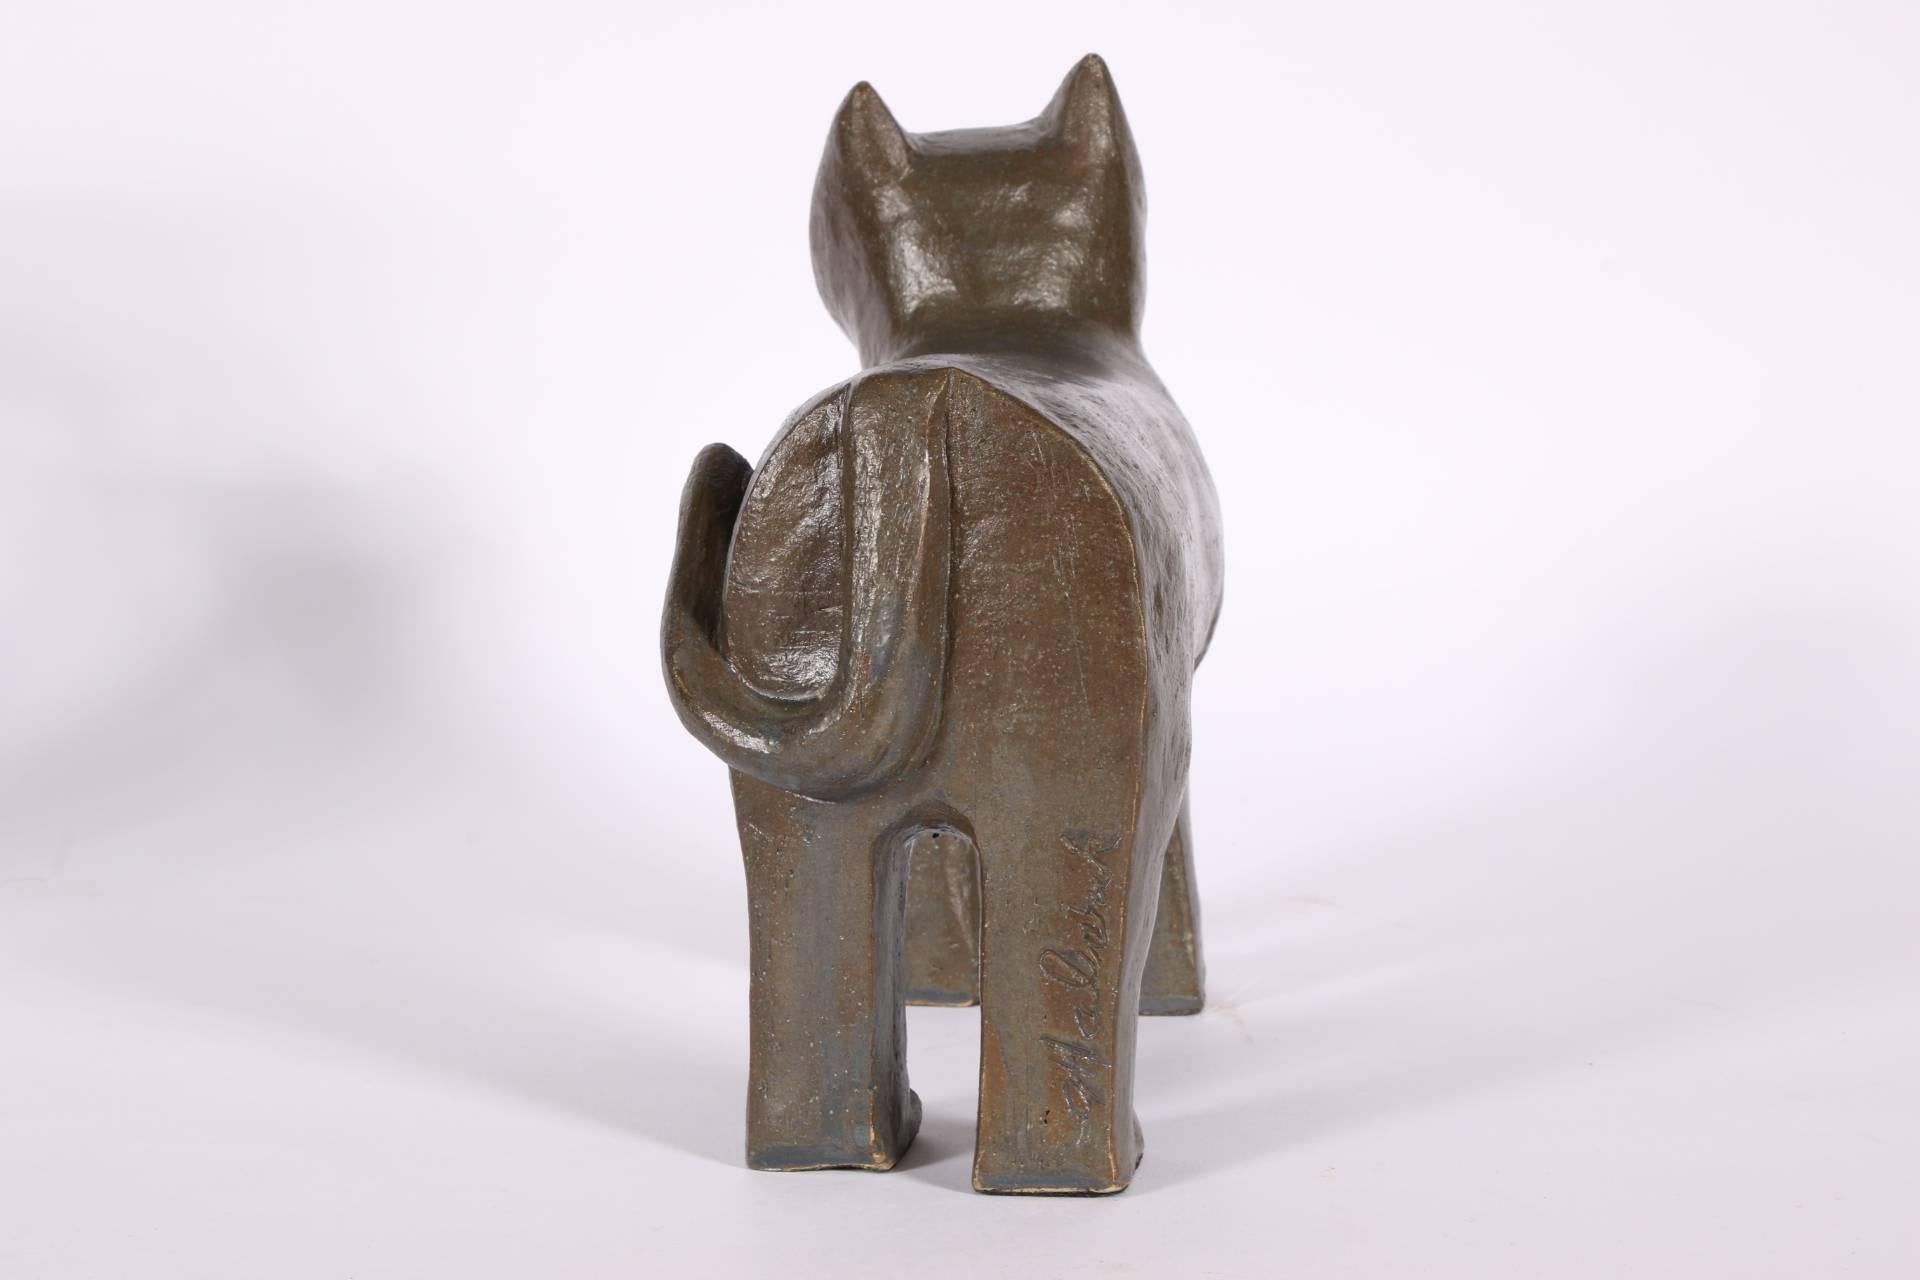 Midcentury cat pottery sculpture in a dark gray-green glaze with white eyes. Signed on one back leg.
Condition: small touched up flake to the right side of the face.